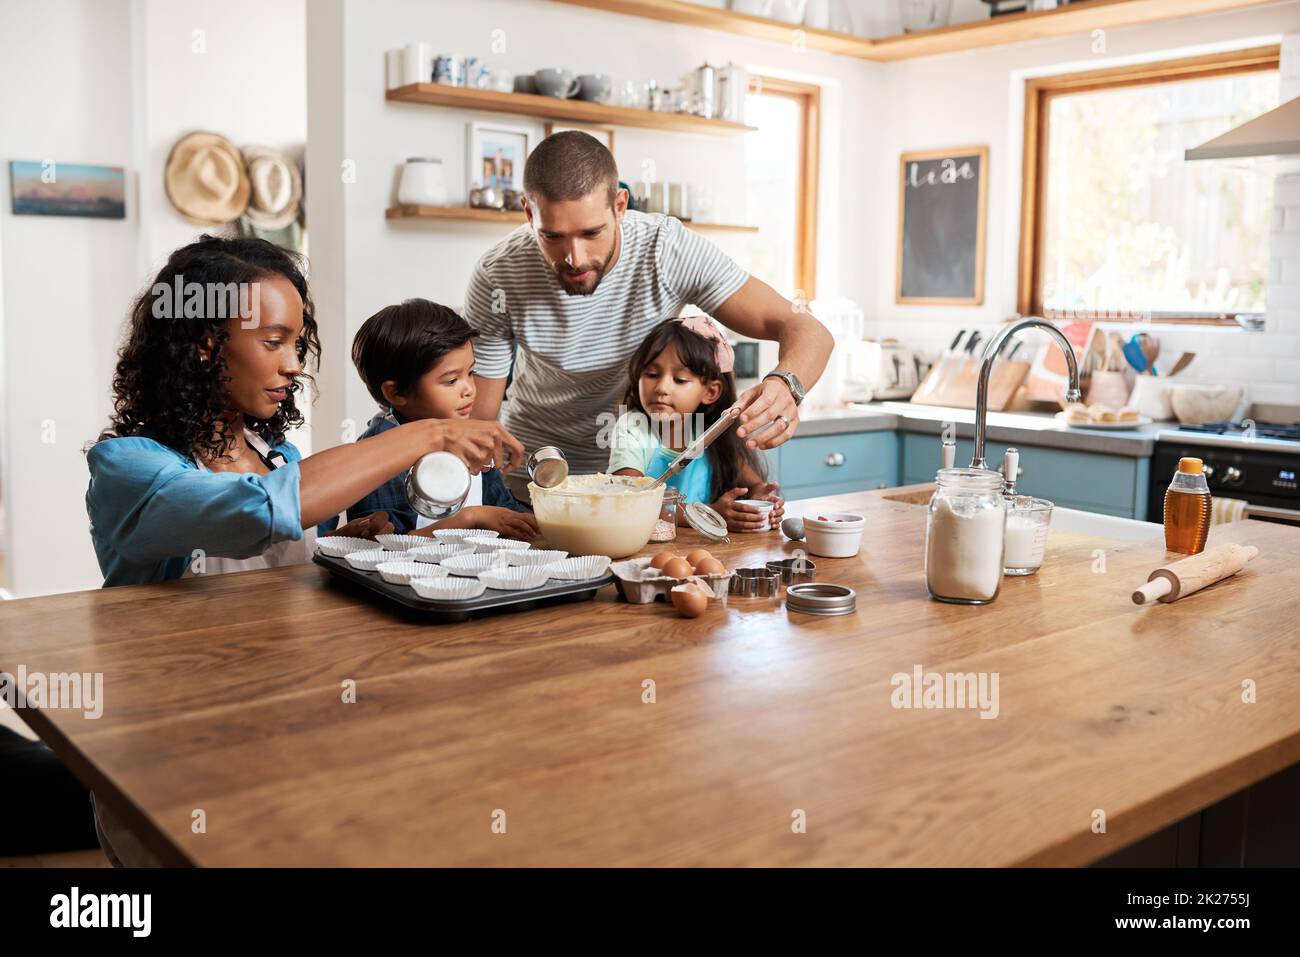 The whole family is getting involved. Cropped shot of a young couple baking at home with their two children. Stock Photo